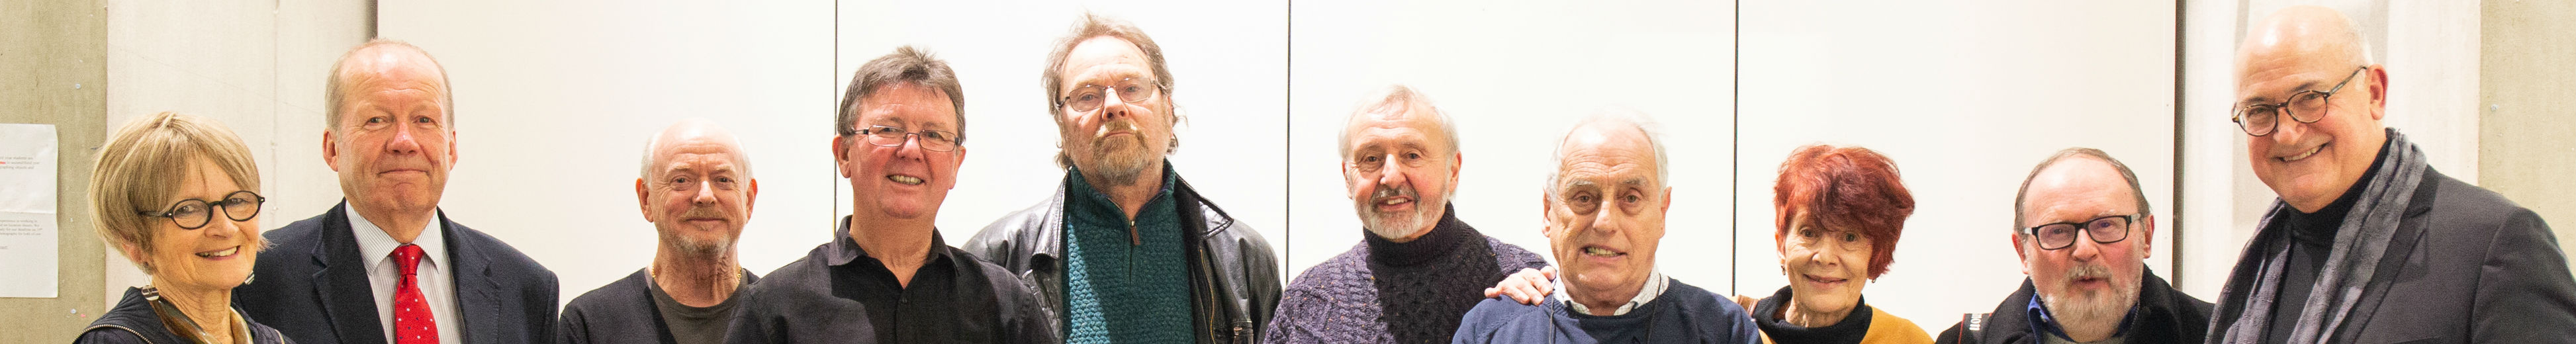 School of Art students from 1969 reunited for a special 50th anniversary exhibition